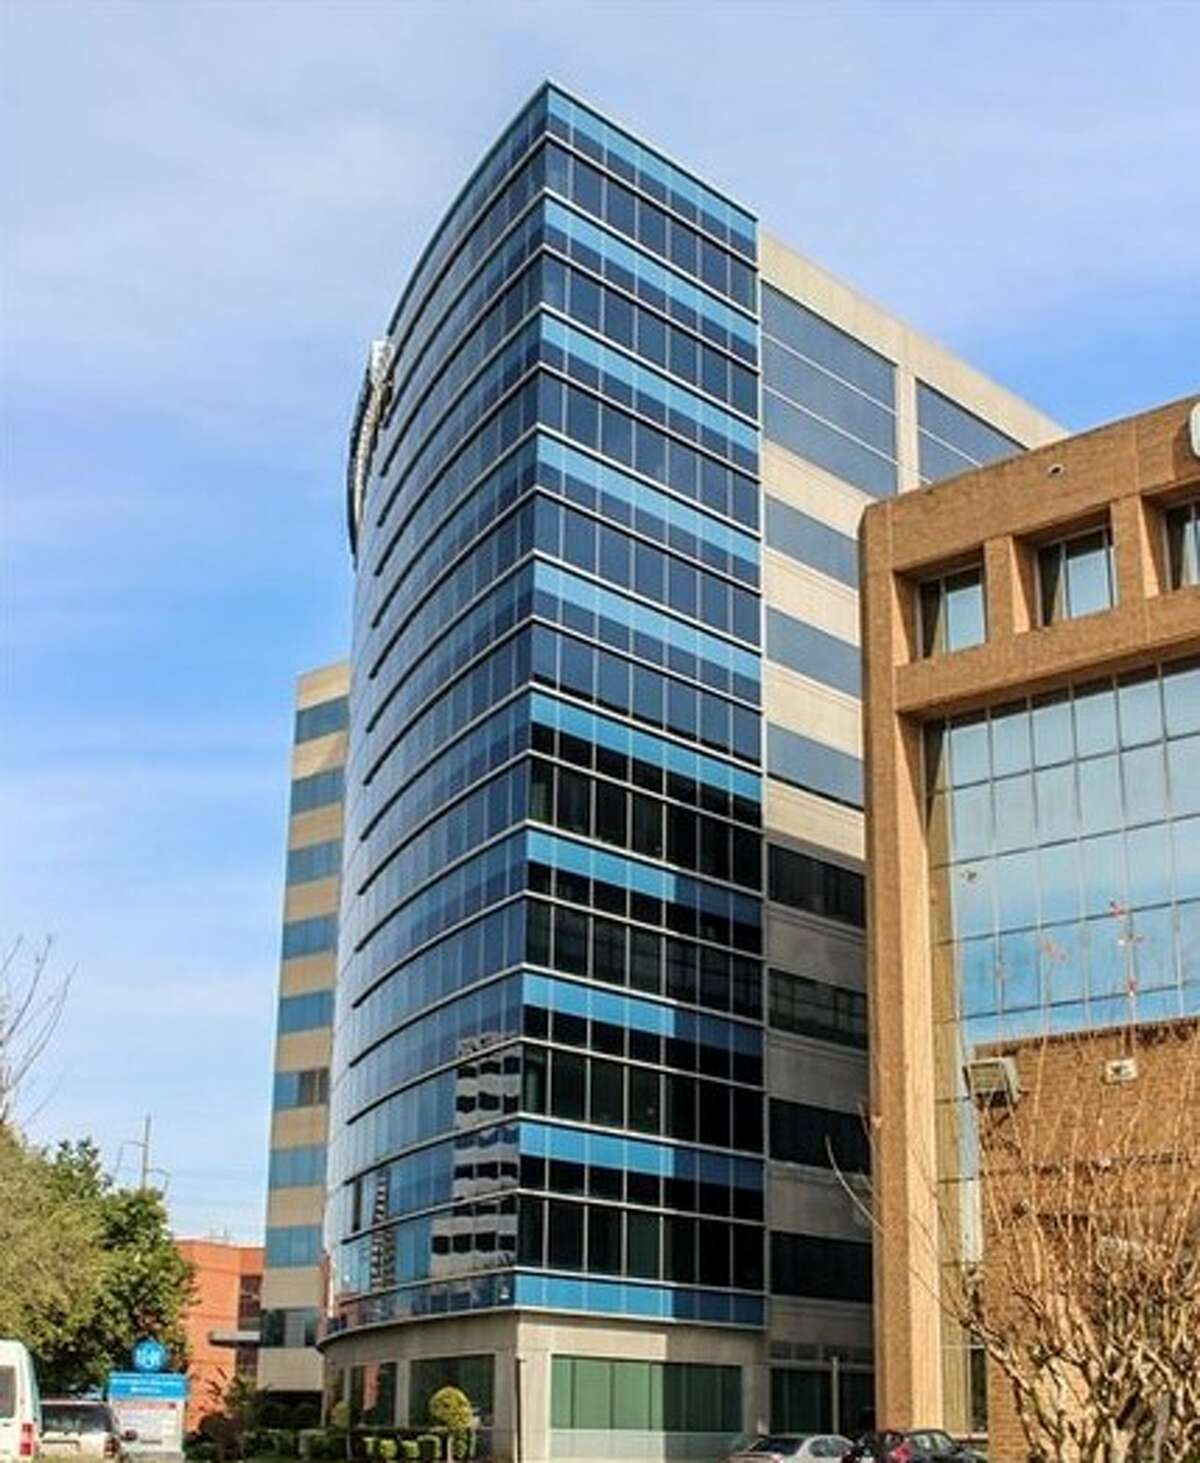 Cambridge Properties has hired NAI Partners to handle leasing of 7501 Fannin. United General Hospital will provide short-term acute care services in the building this fall, NAI Partners said.